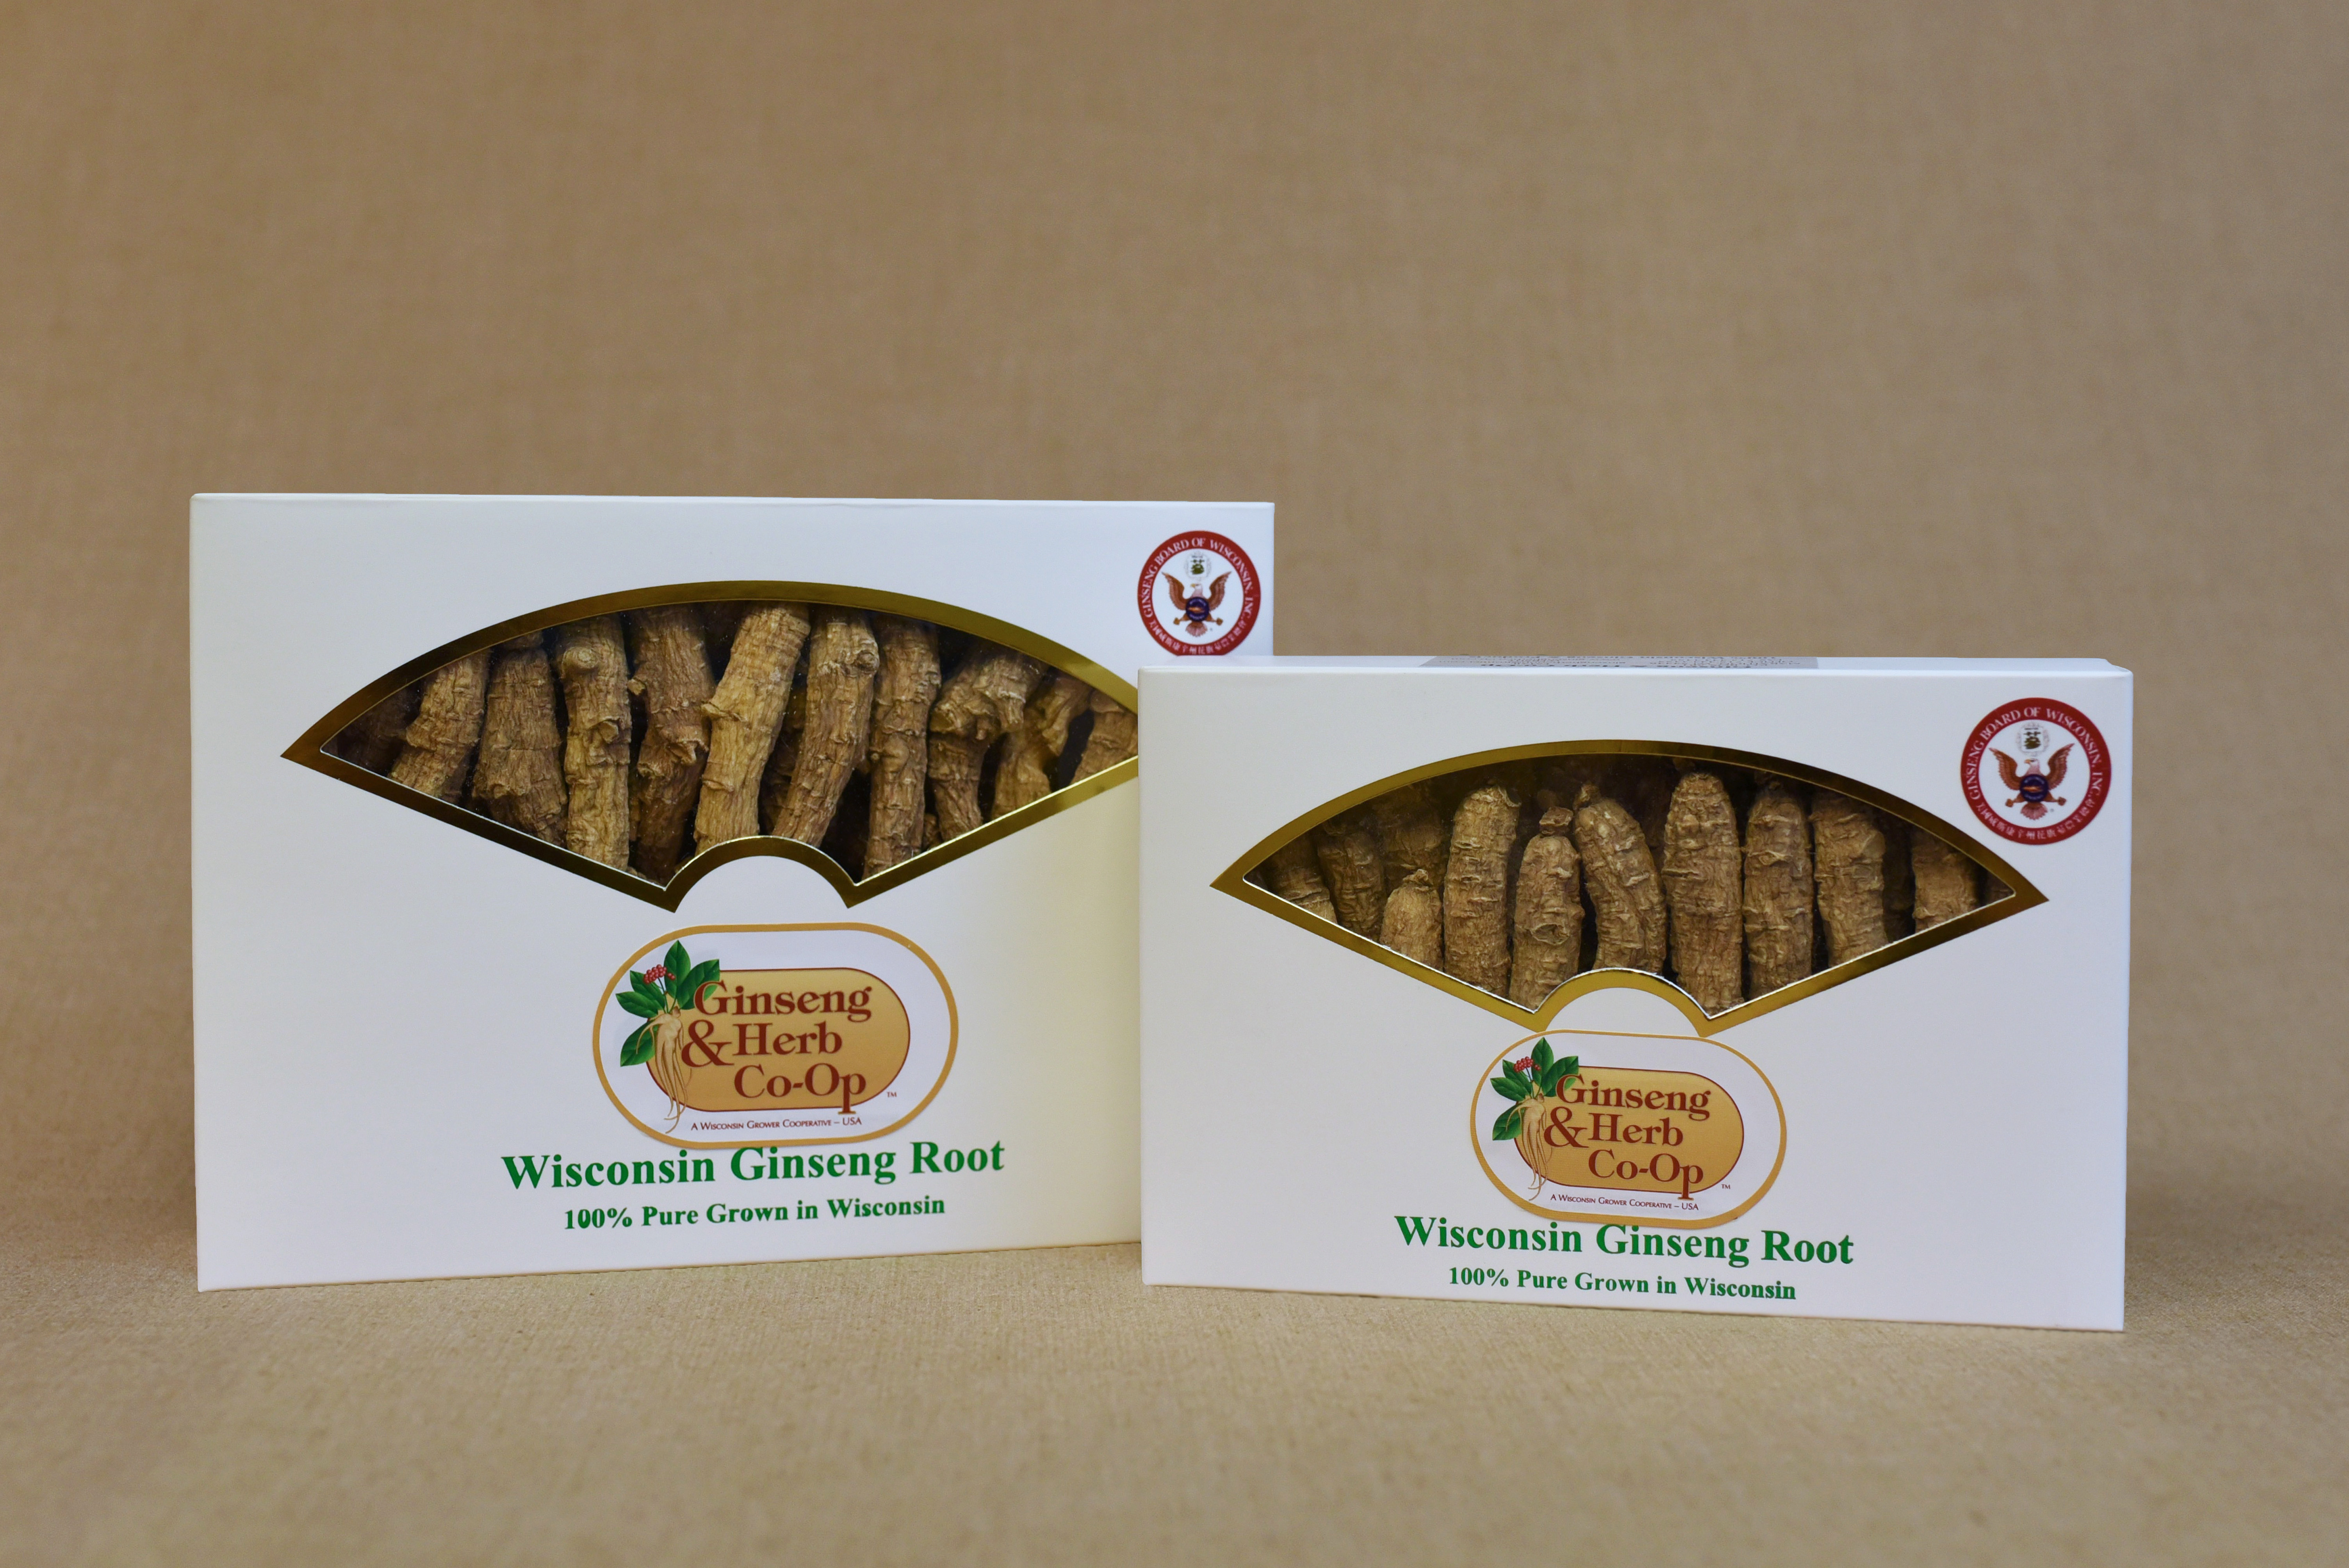 Buy Now! high quality Wisconsin Ginseng roots in Racine, WI